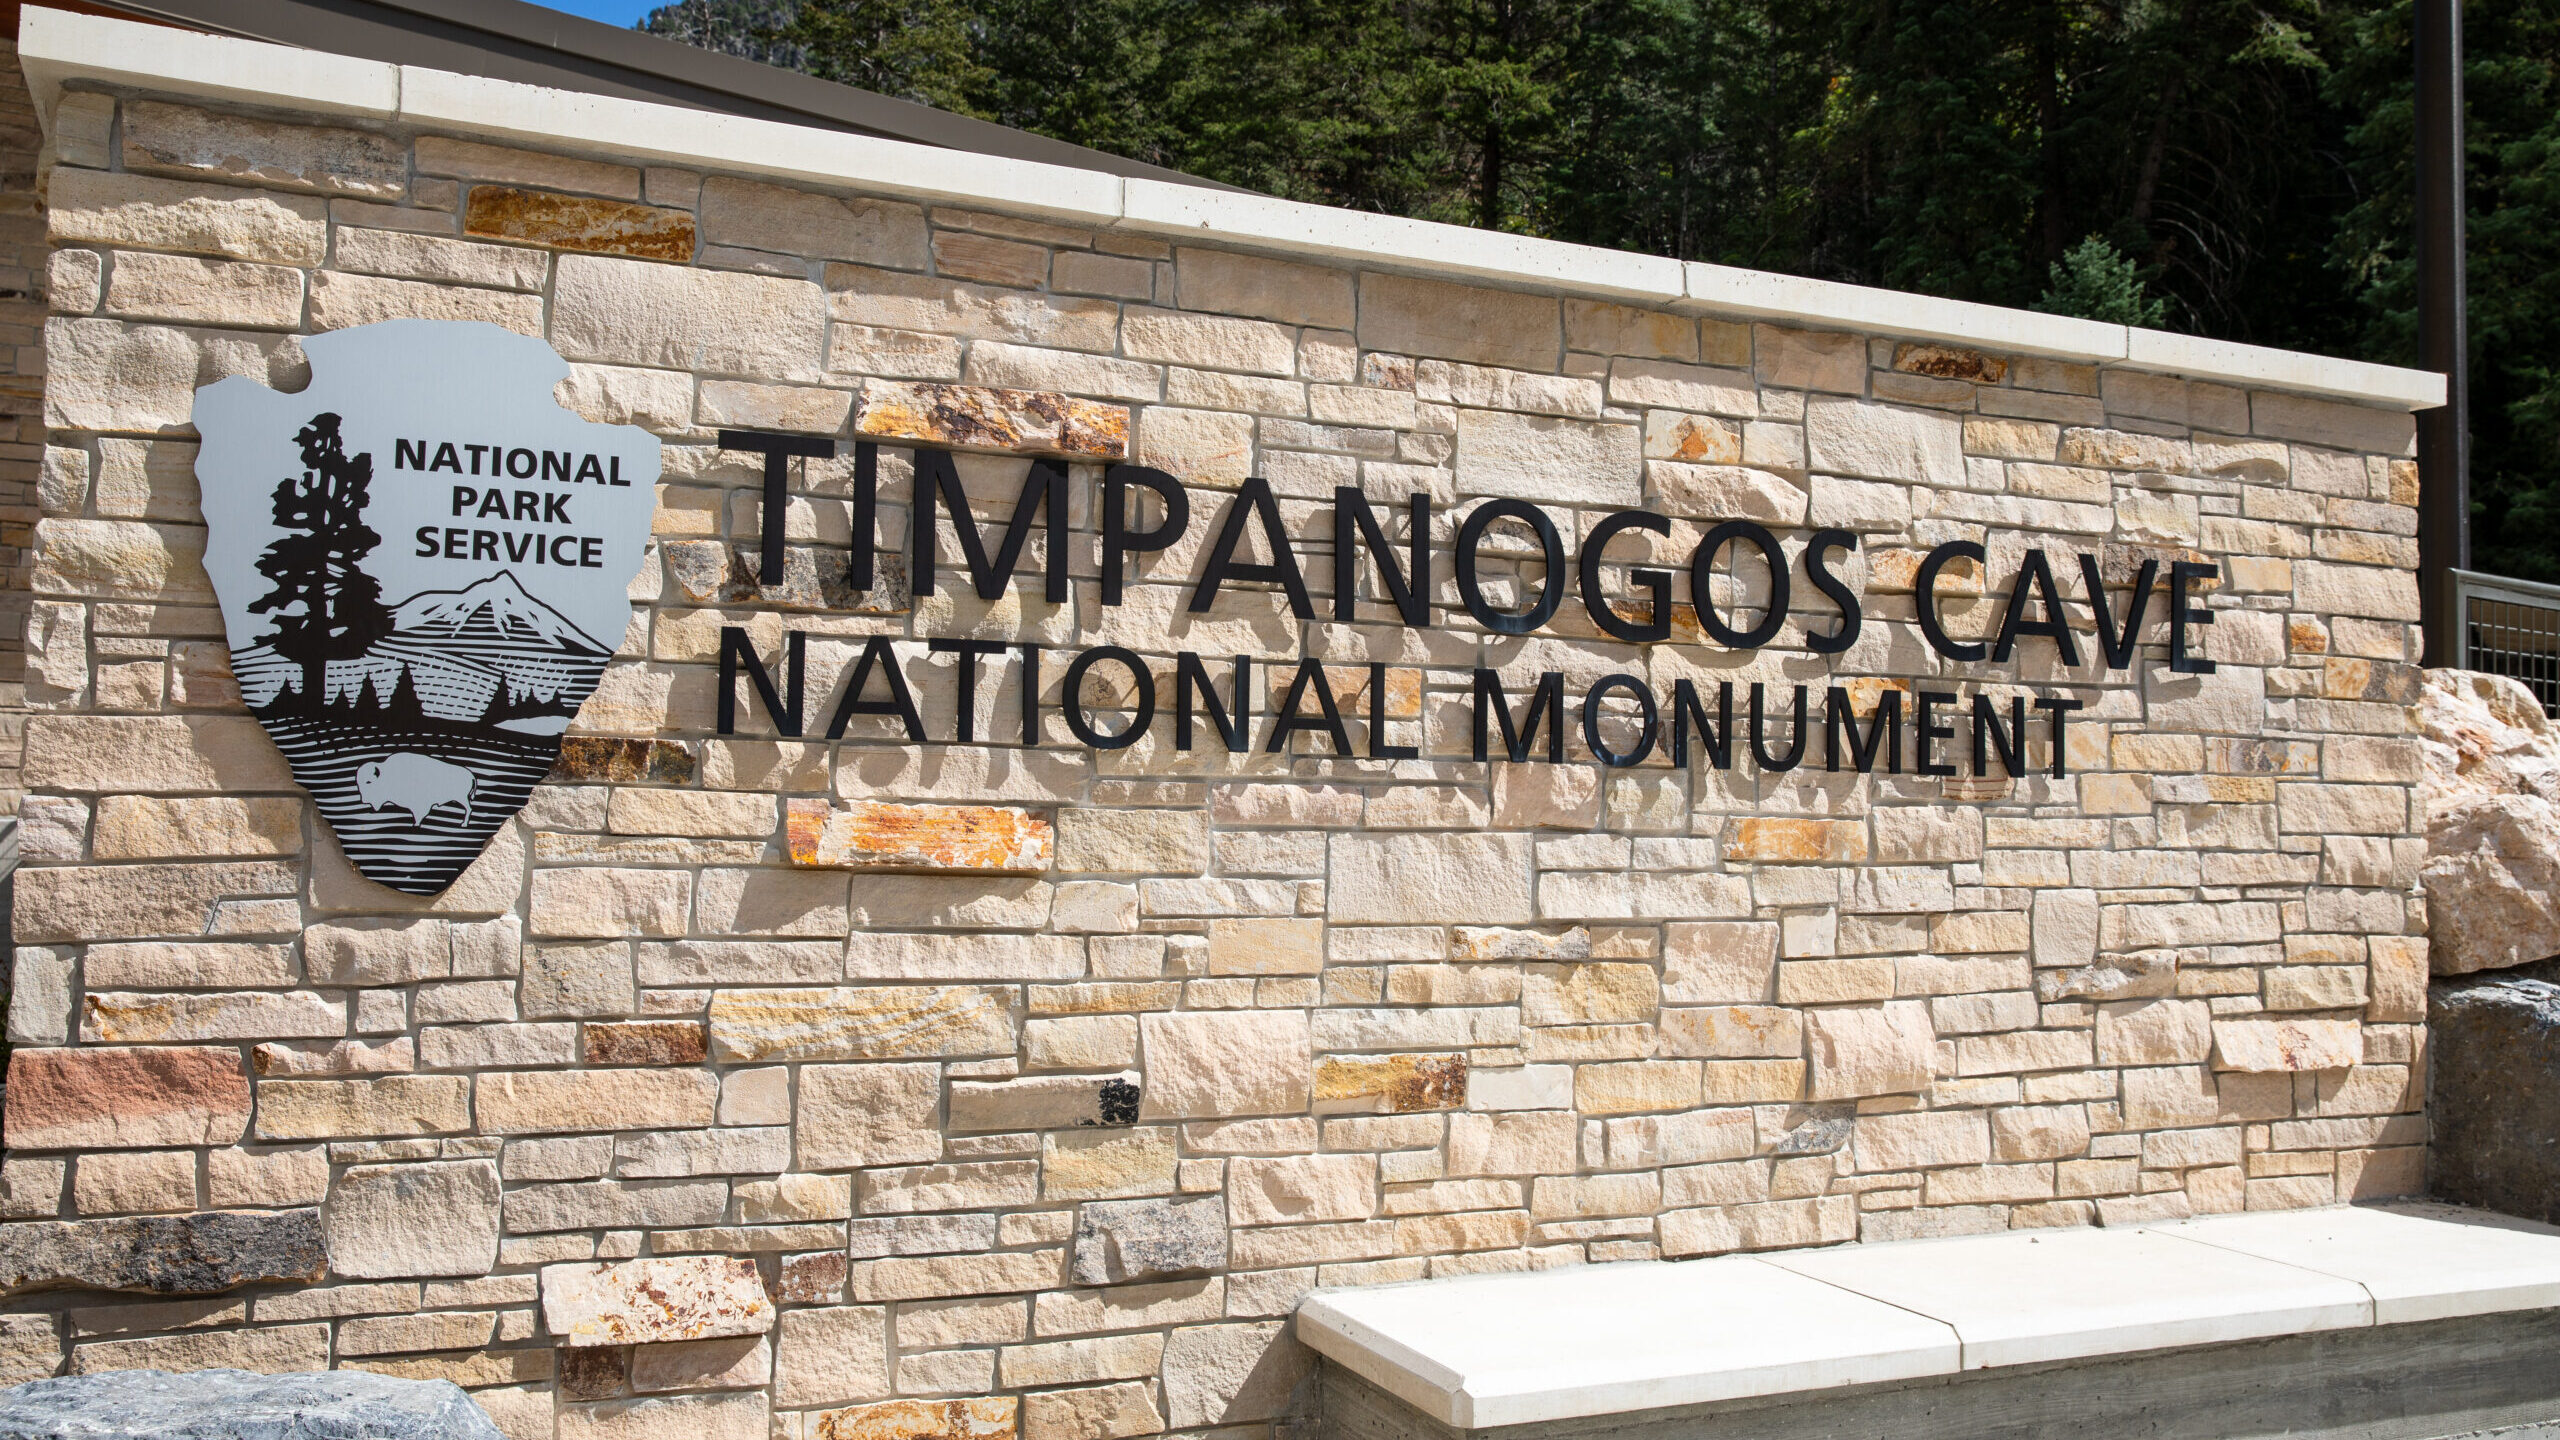 Around 60,000 people ayear visit The Timpanogos Cave National Monument in  American Fork Canyon, Ut...